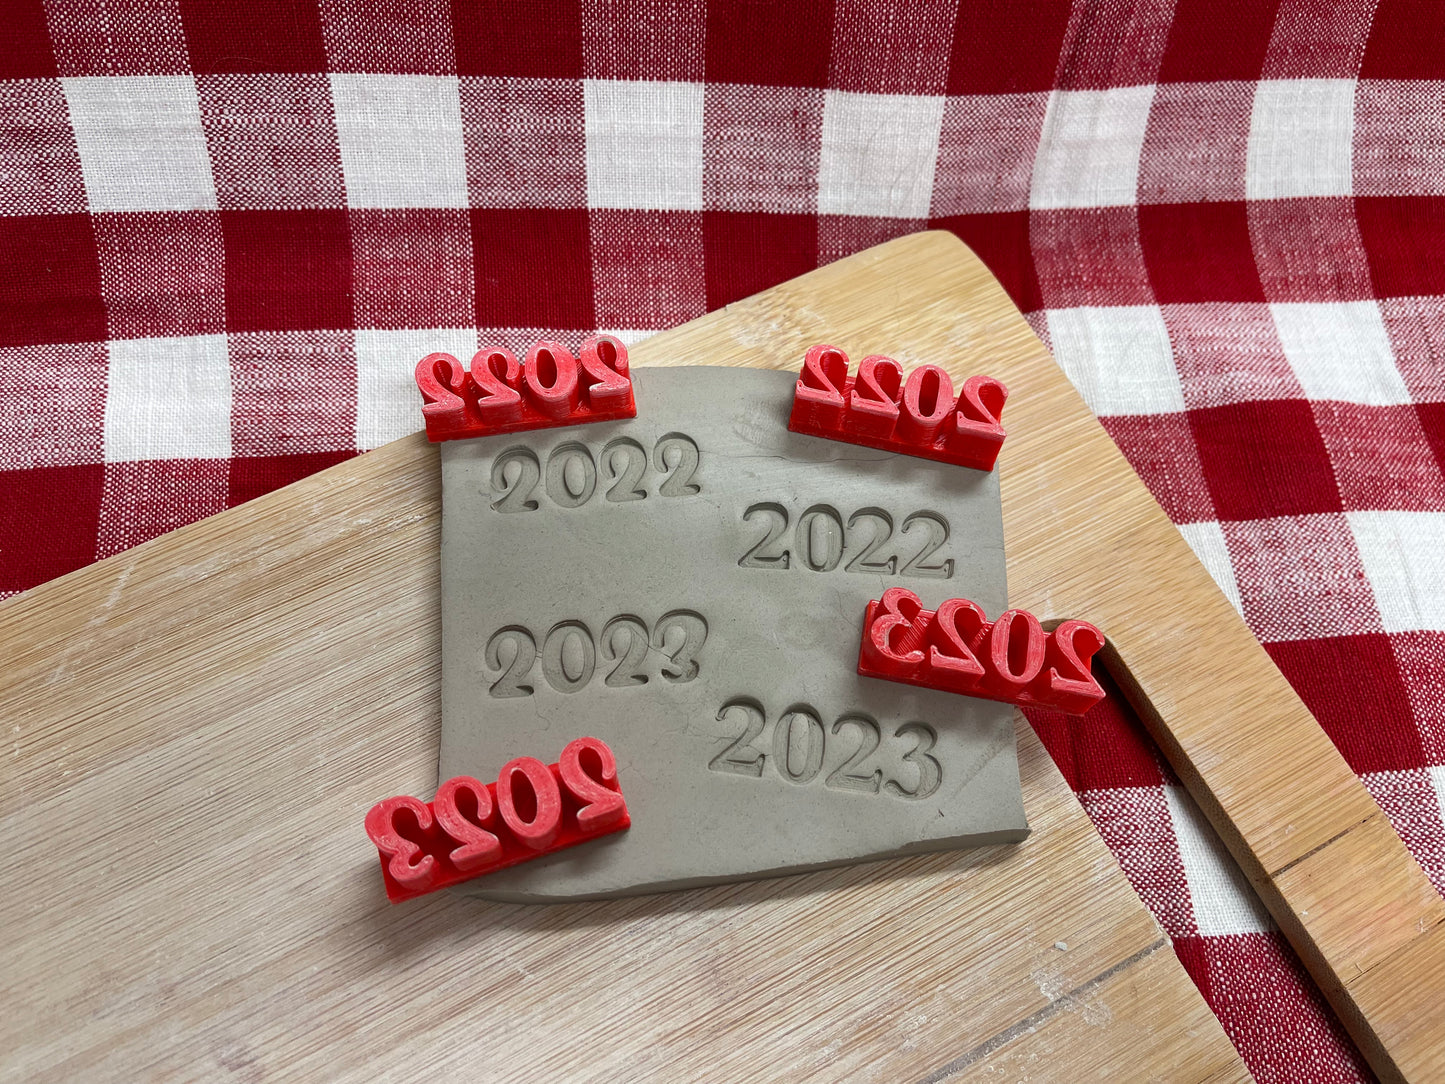 Pottery Stamp Words - Year 2022 or 2023, 3D Printed, Multiple sizes available, each or set